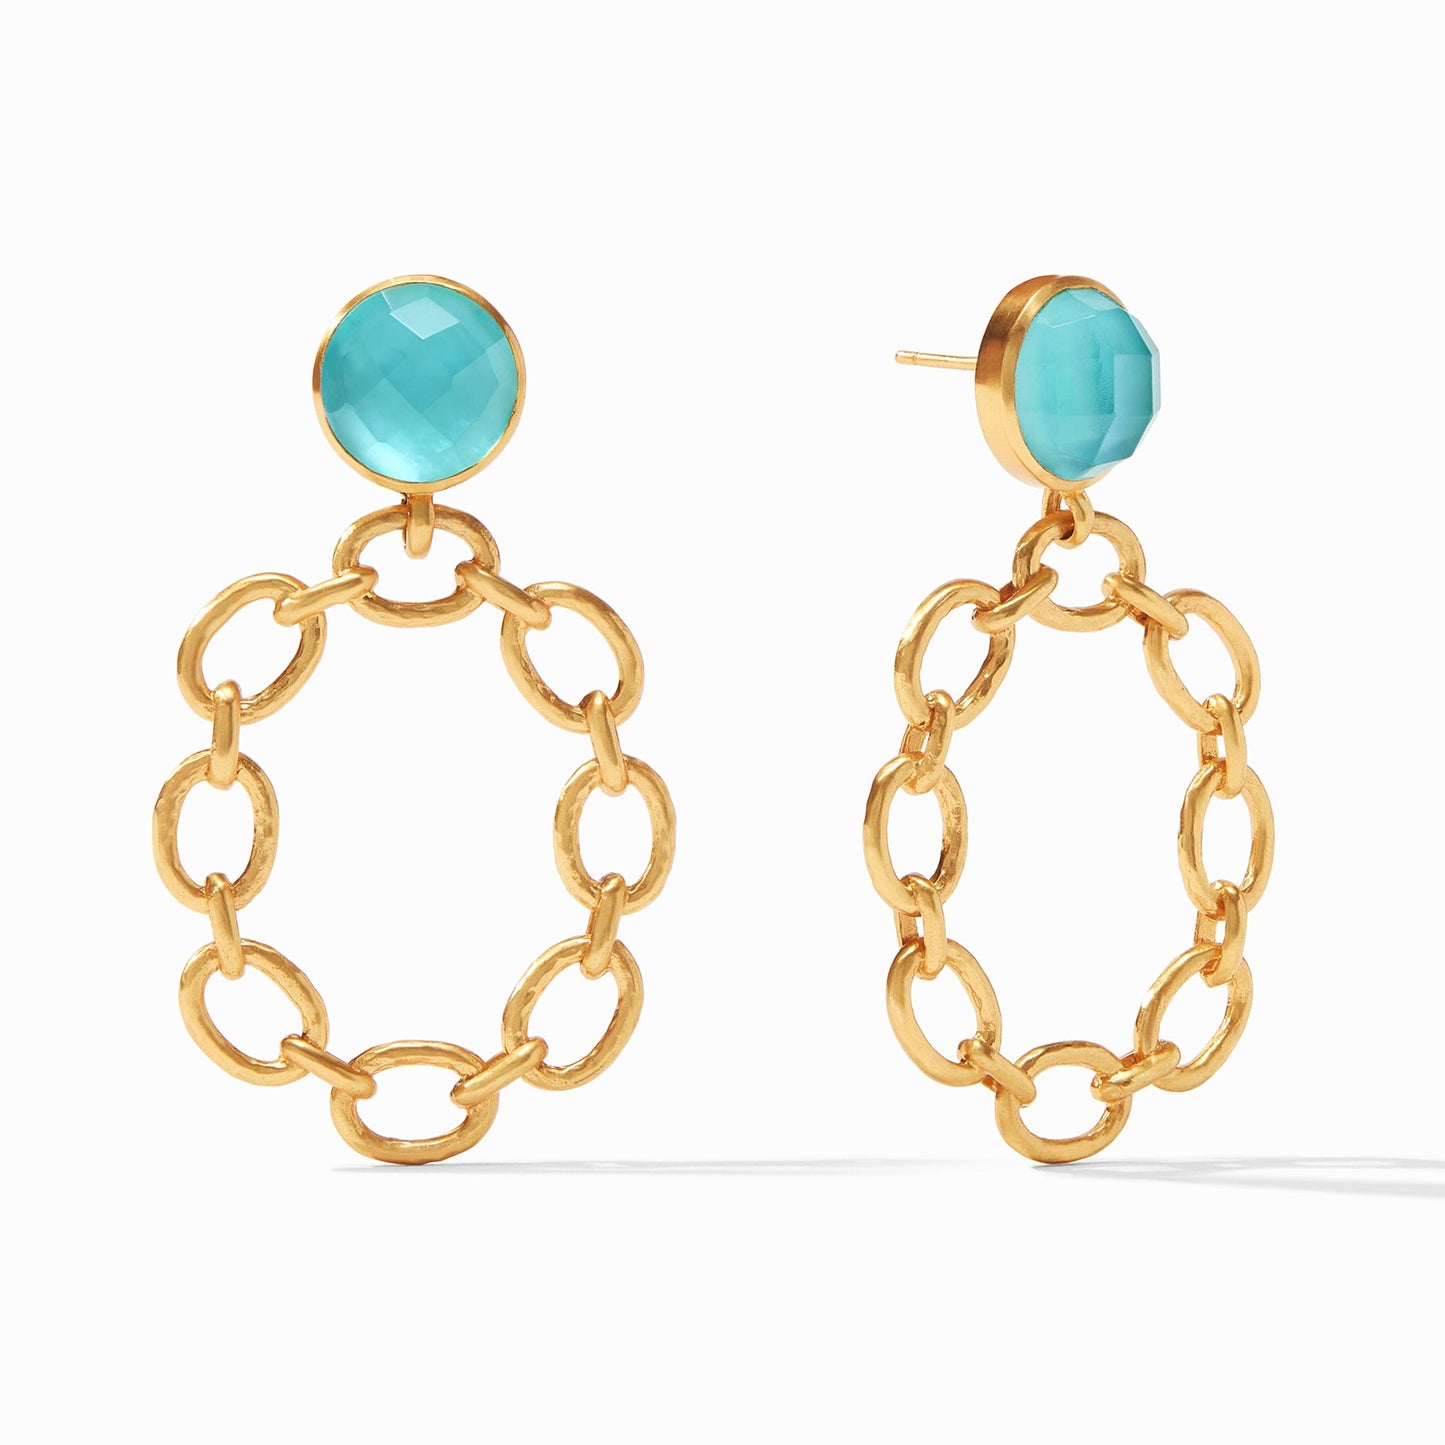 Load image into Gallery viewer, Palermo Statement Earring Bahamian Blue - Muse Shoe Studio
